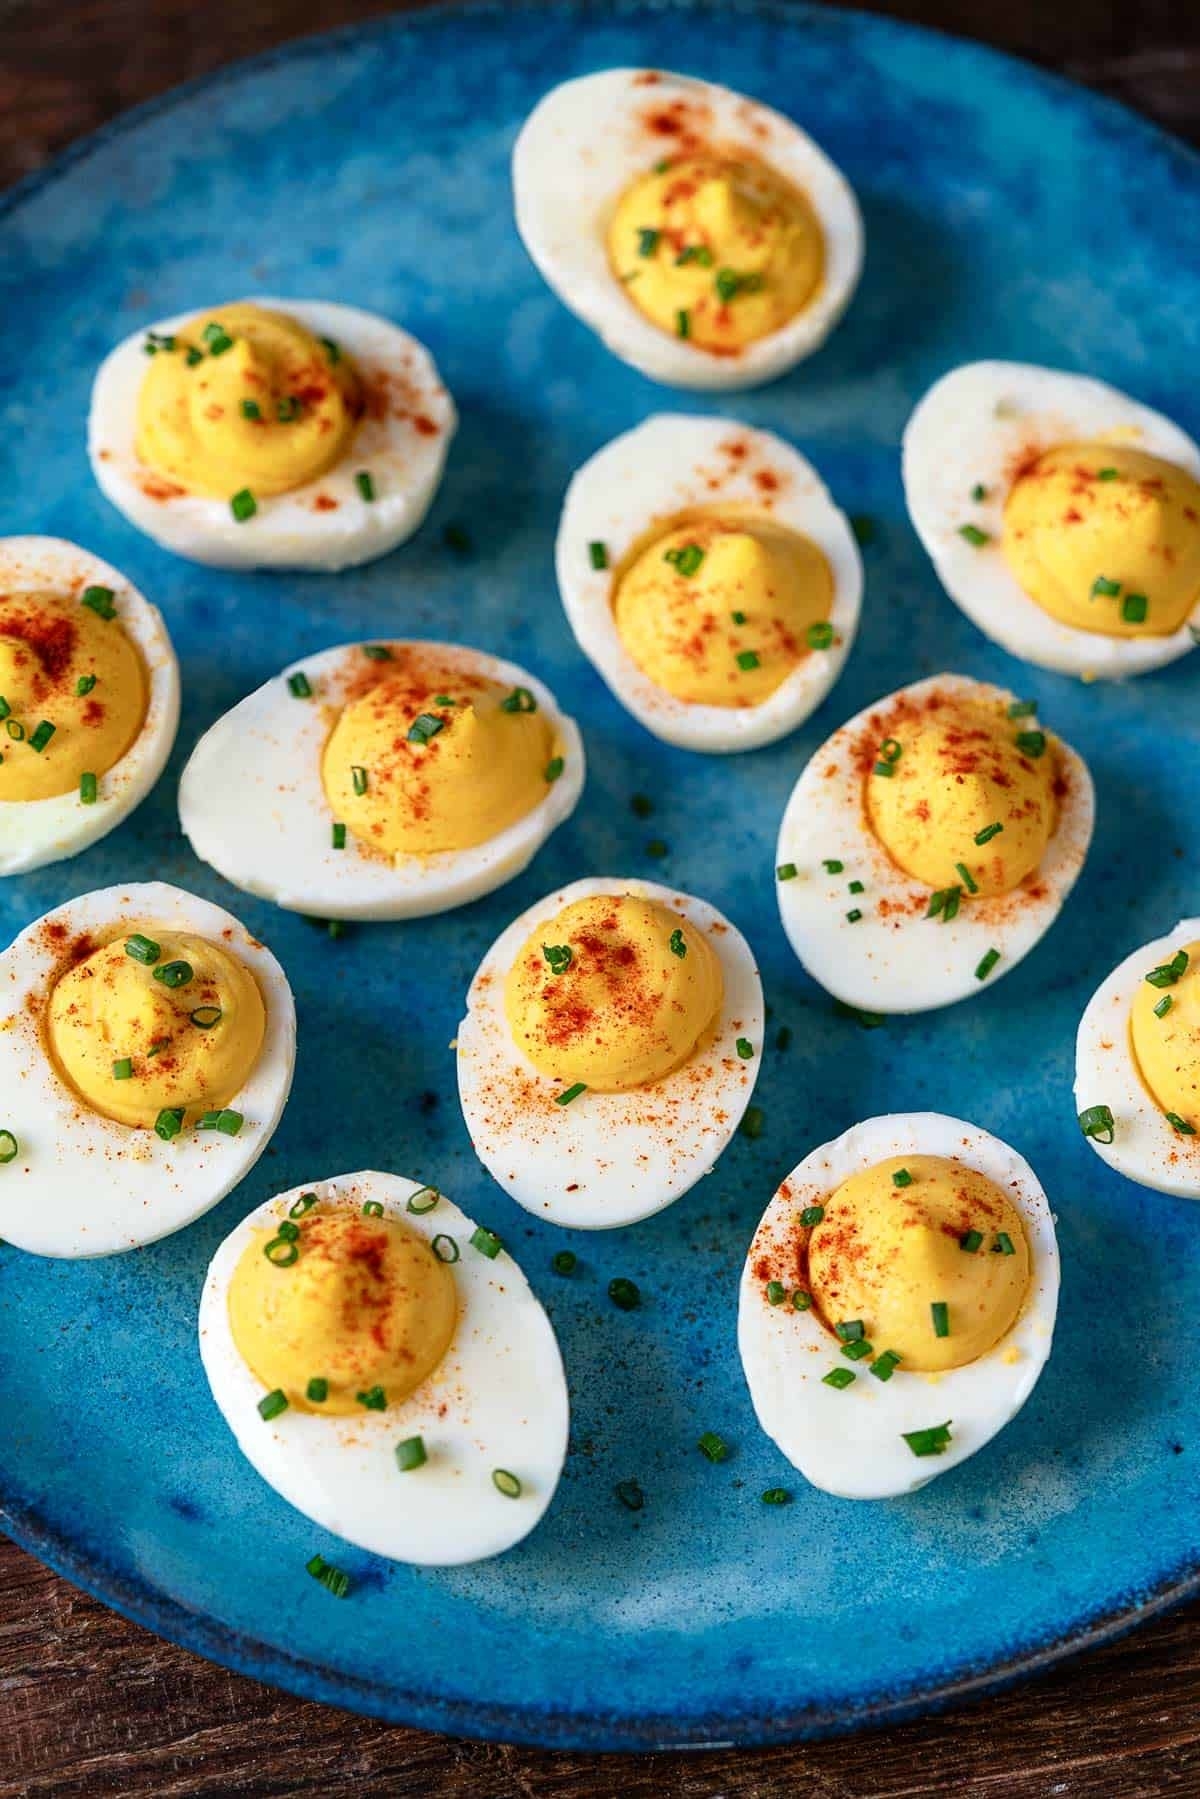 A plate of deviled eggs garnished with paprika and chives